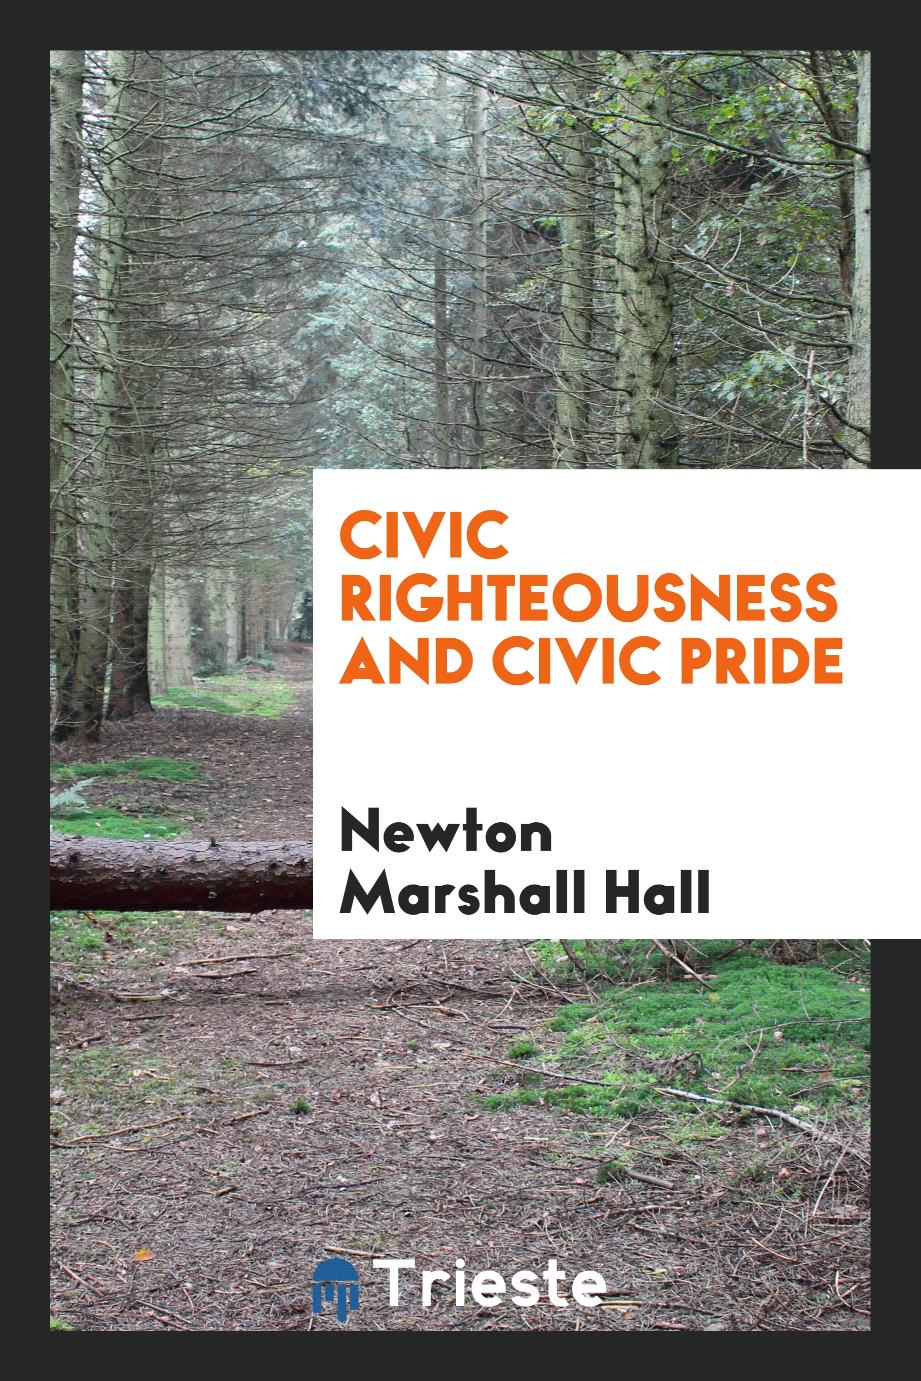 Civic righteousness and civic pride